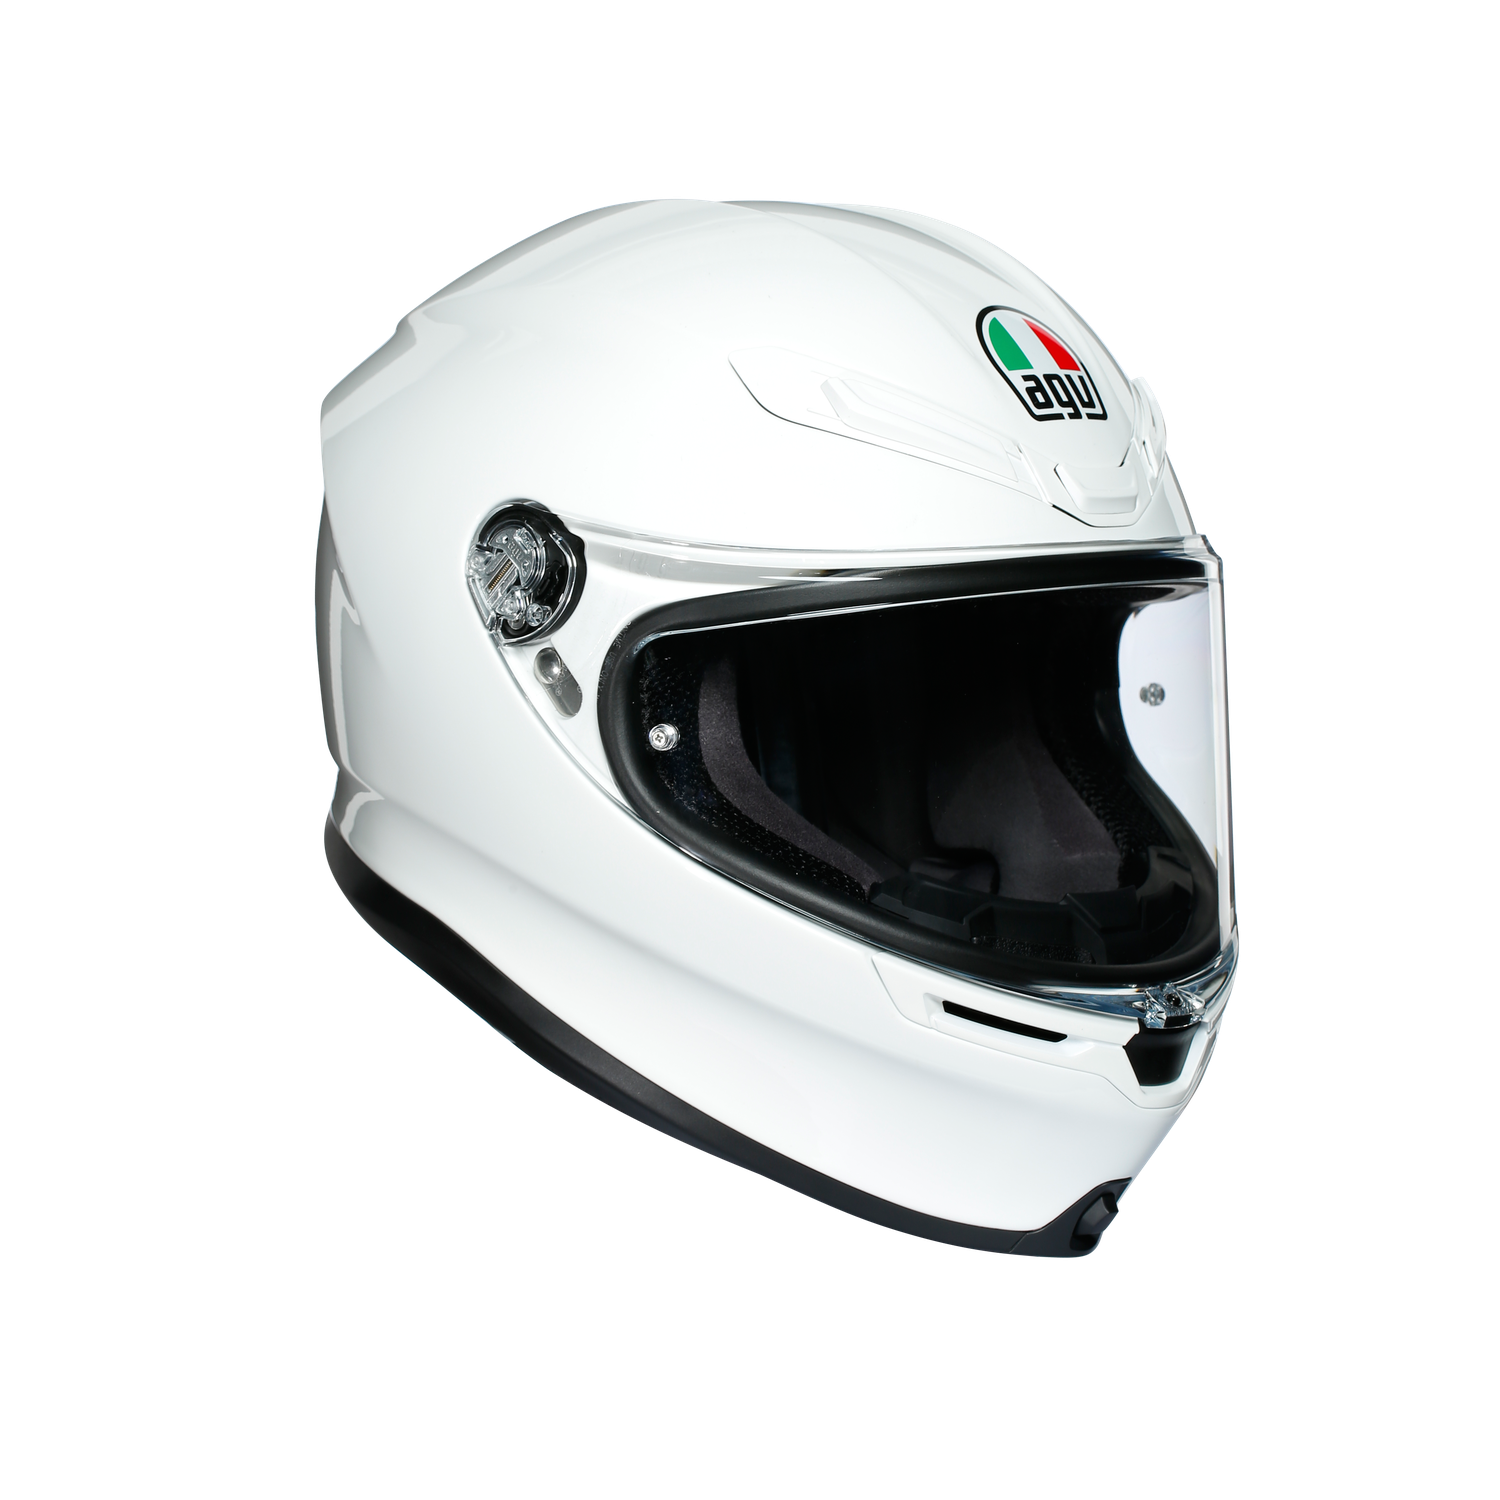 K6 AGV JIST SOLID MPLK Asia Fit - WHITE